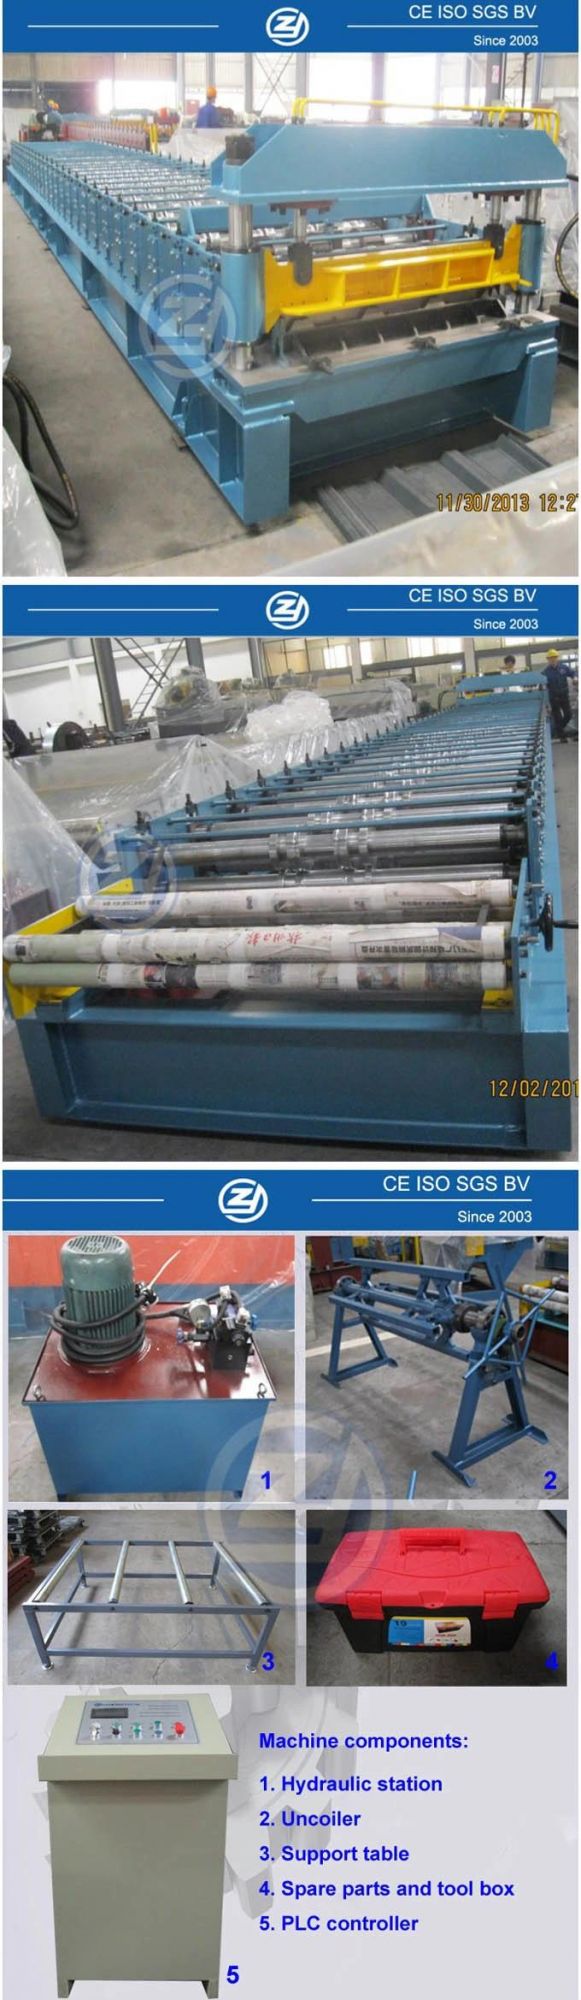 Steel Roof Roll Forming Machine